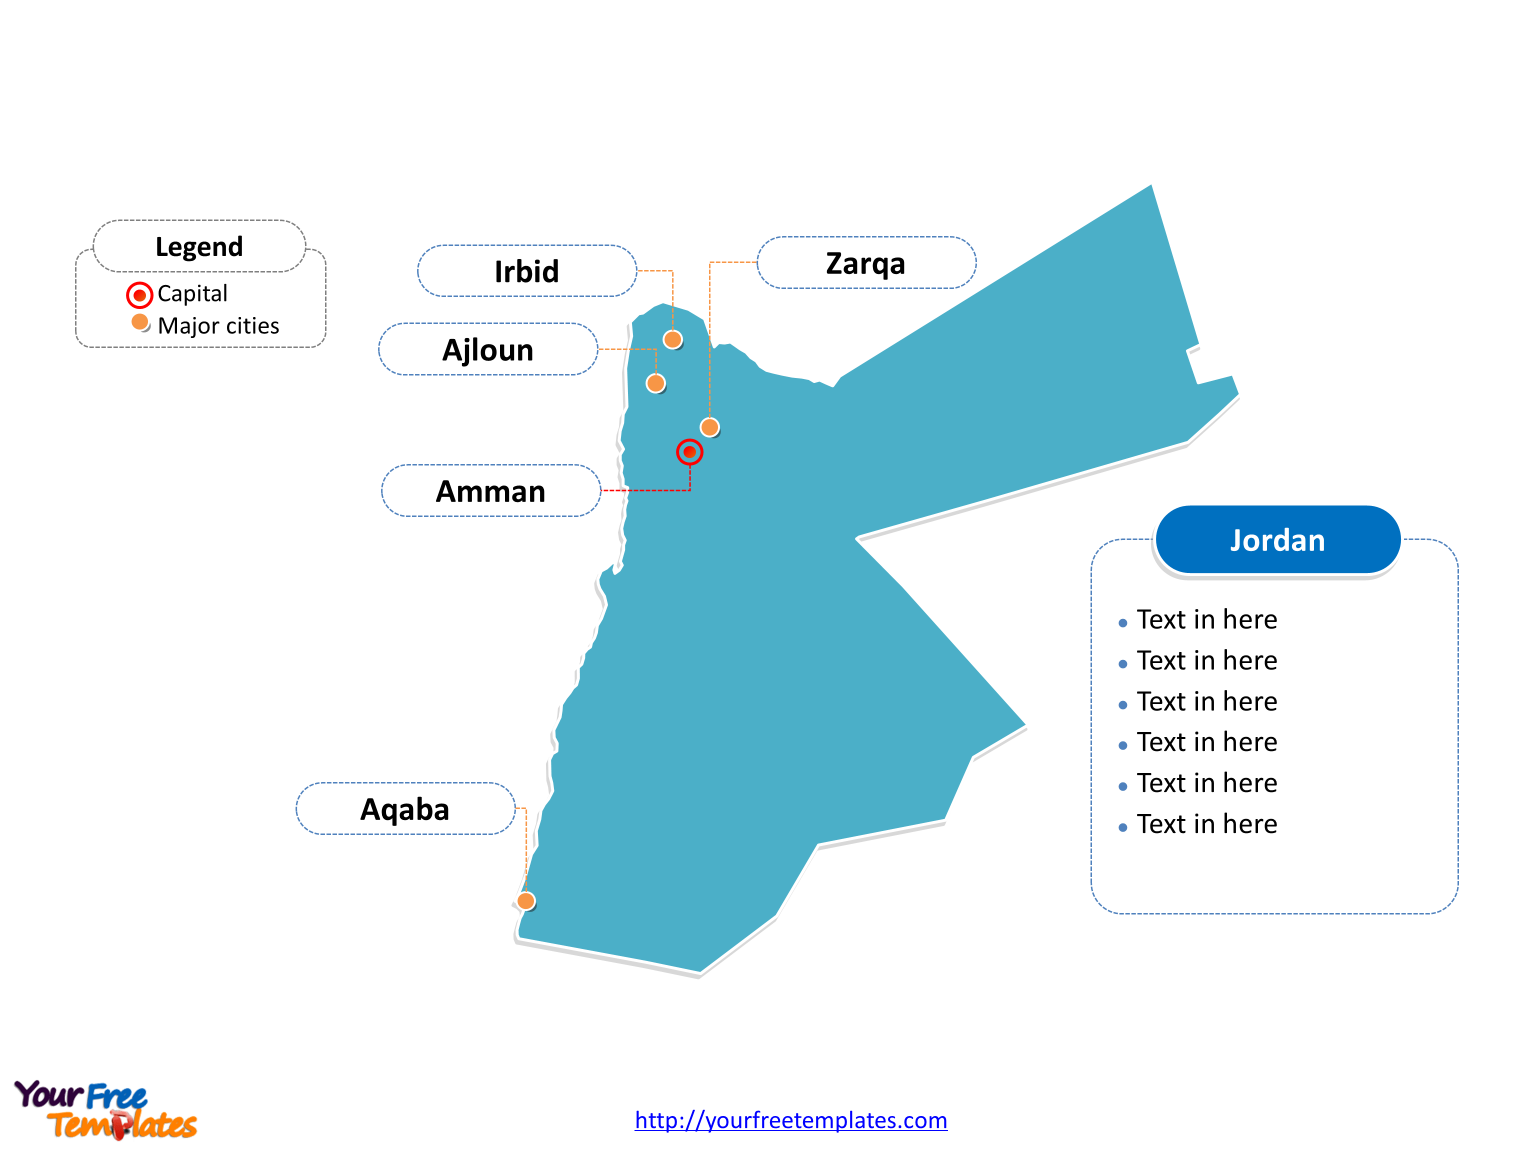 Jordan Outline map labeled with cities